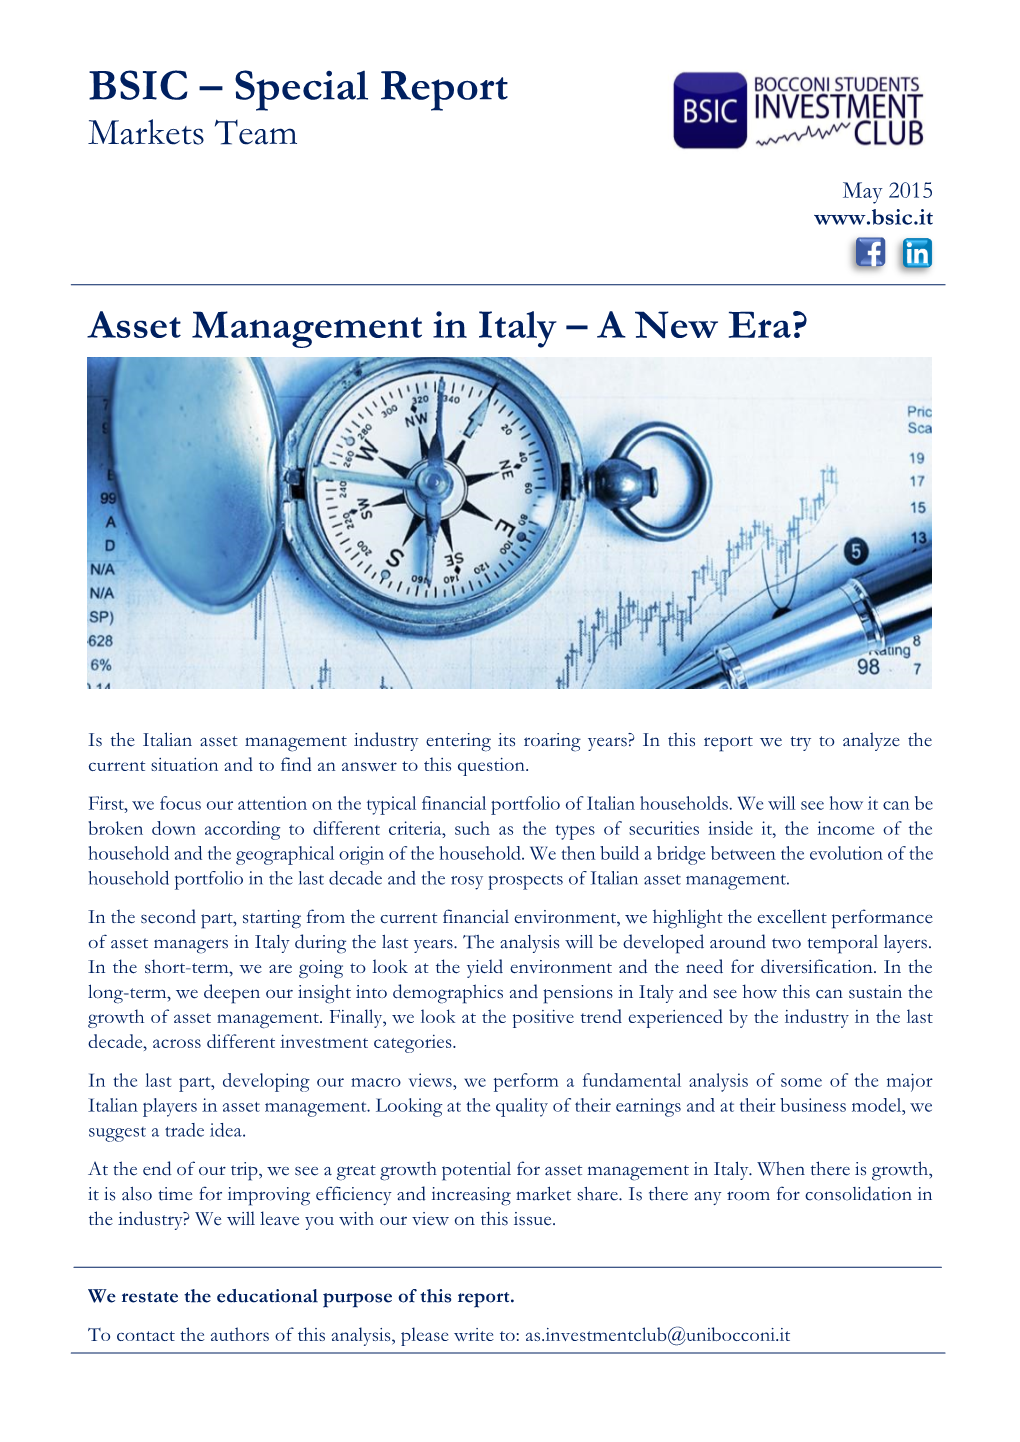 Asset Management in Italy – a New Era?